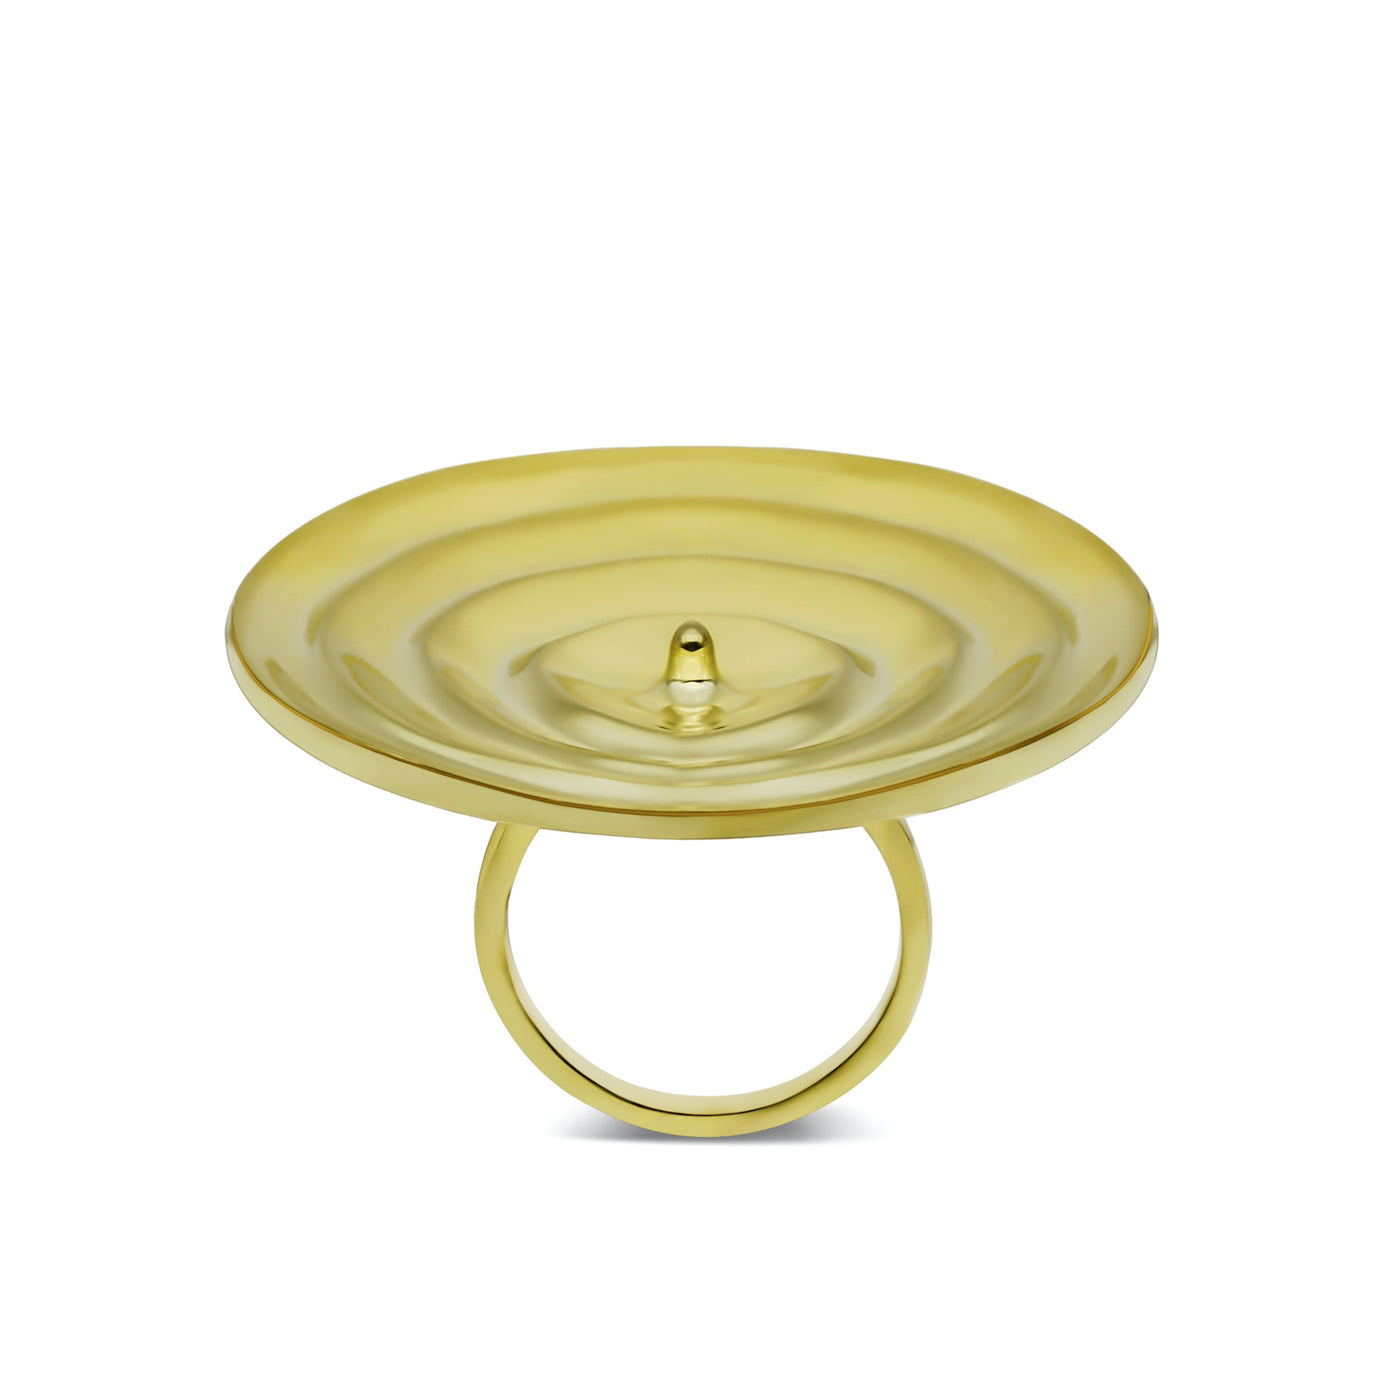 Gold round cocktail ring from Atelier ORMAN